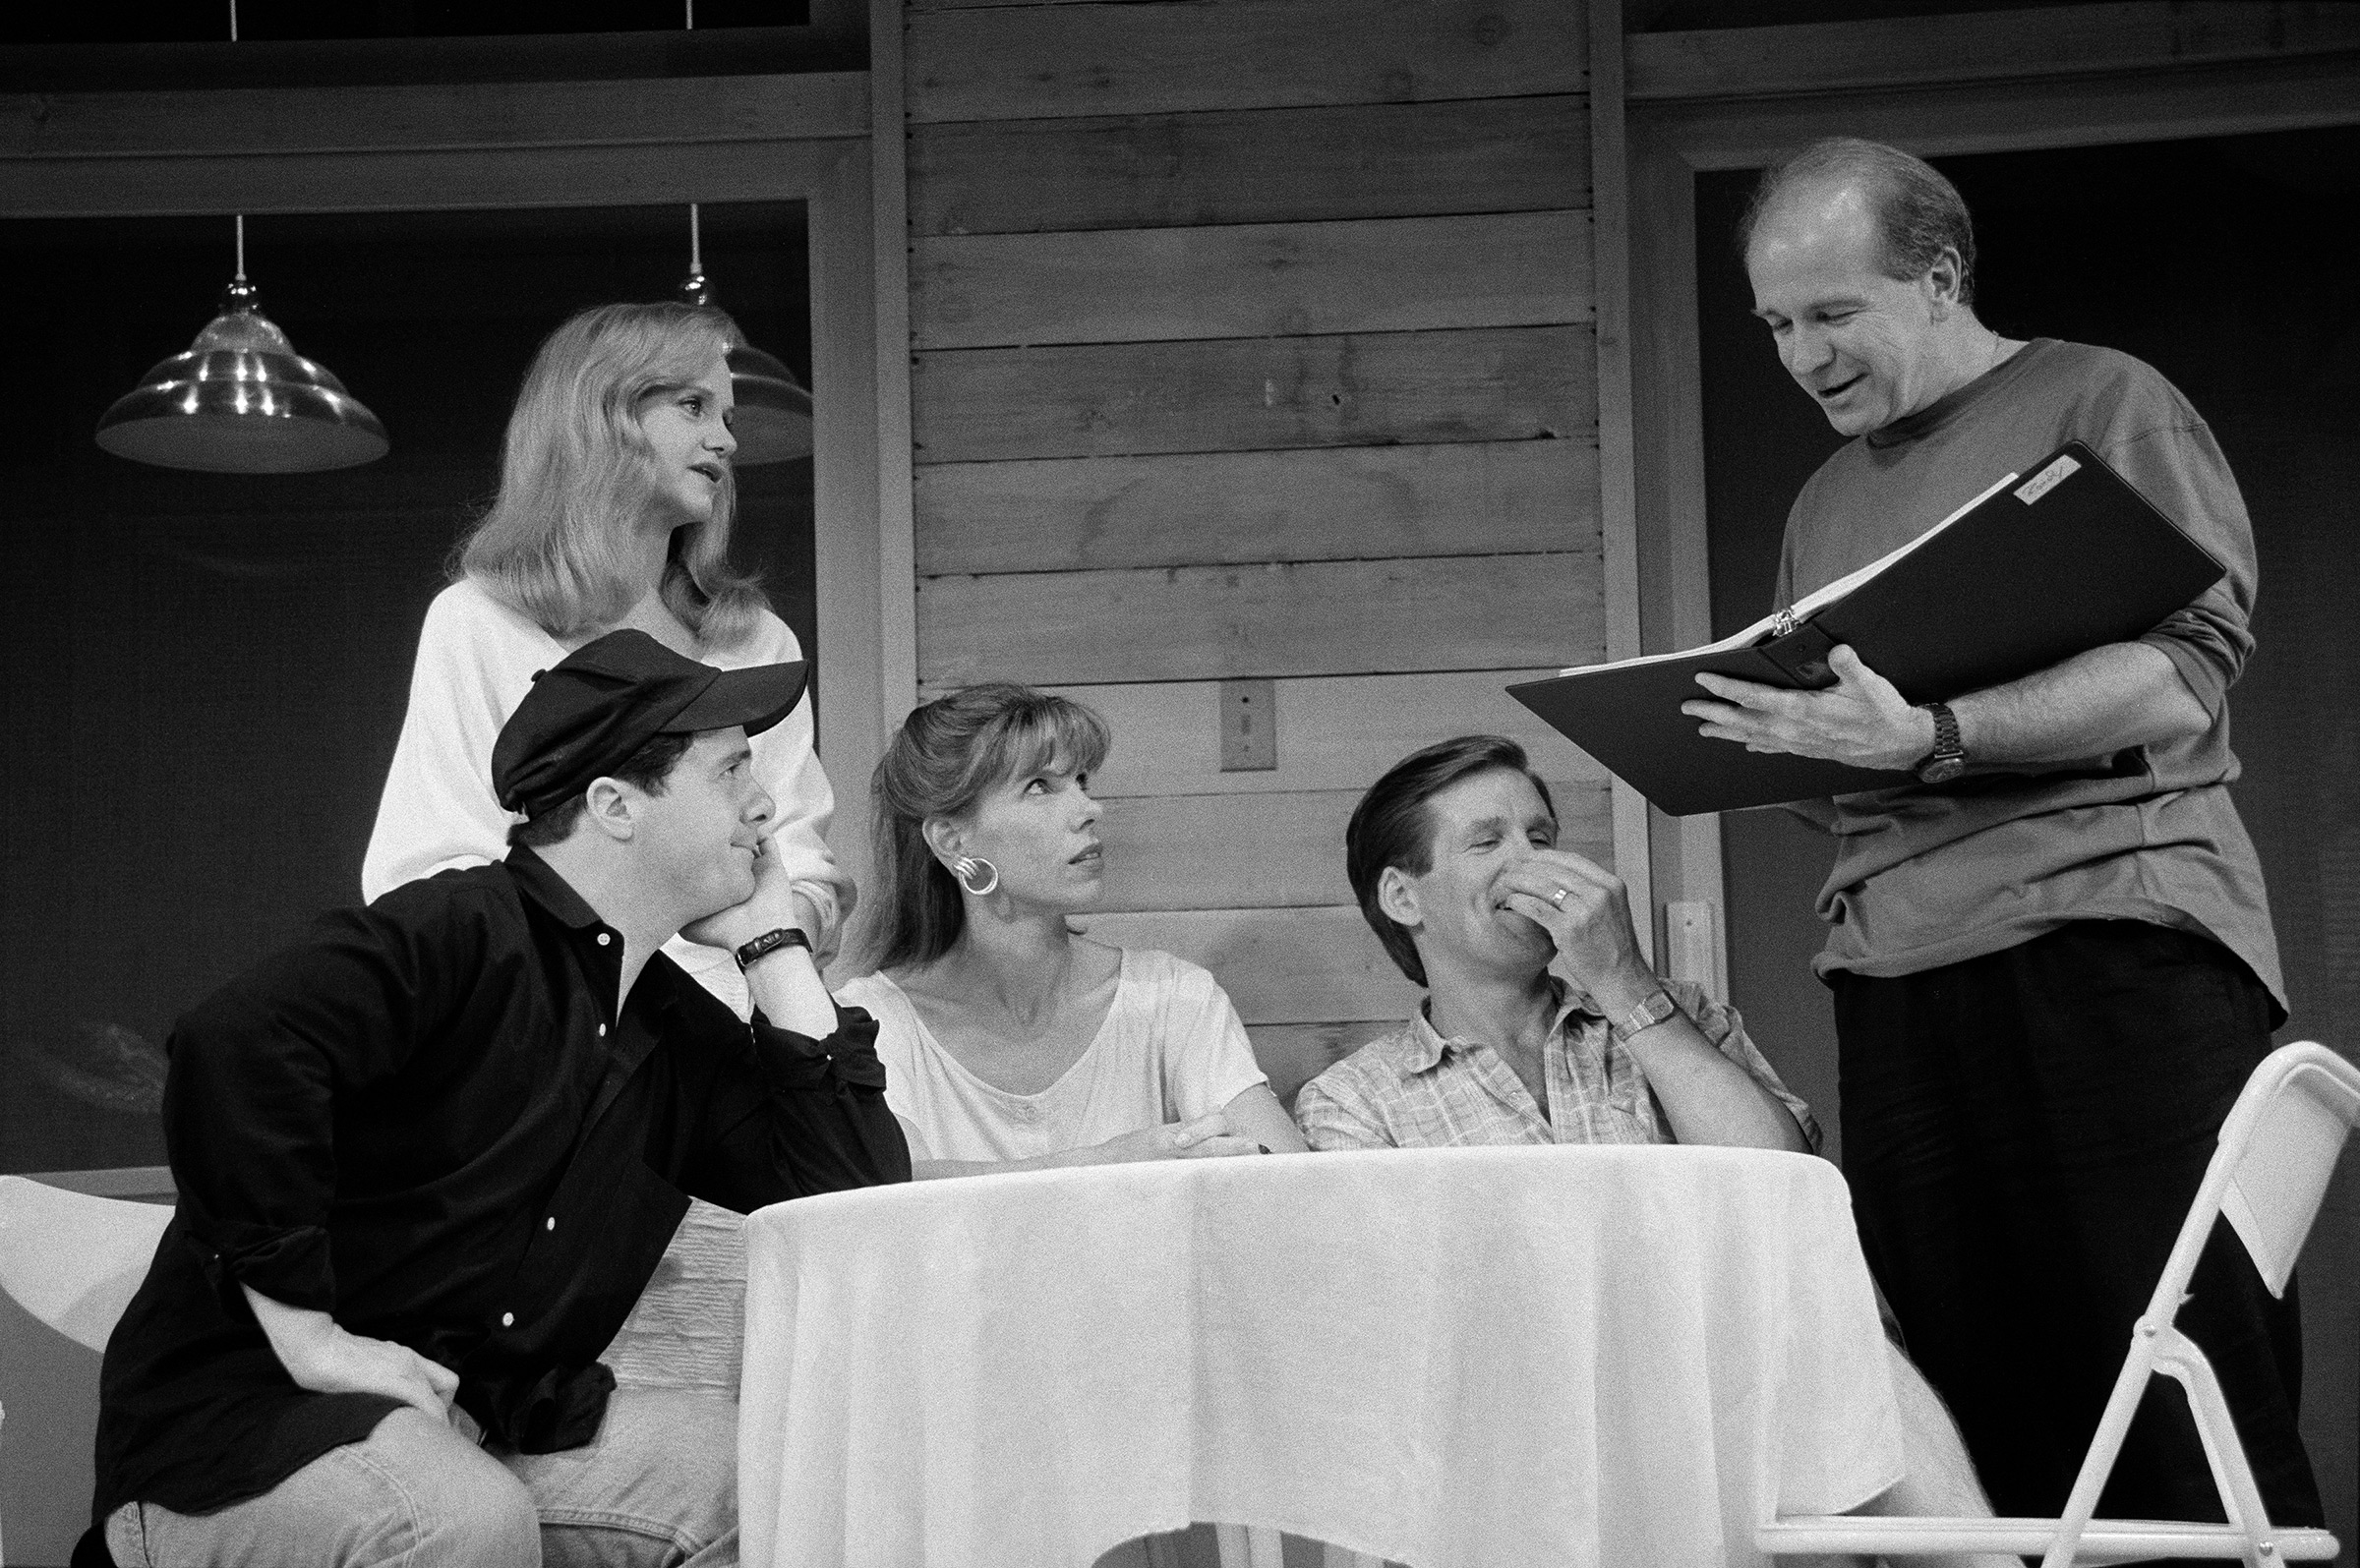 Playwright Terrence McNally, right, at a rehearsal for "Lips Together, Teeth Apart" in New York on June 27, 1991, with, from left, Nathan Lane, Swoosie Kurtz, Christine Baranski and Anthony Heald.